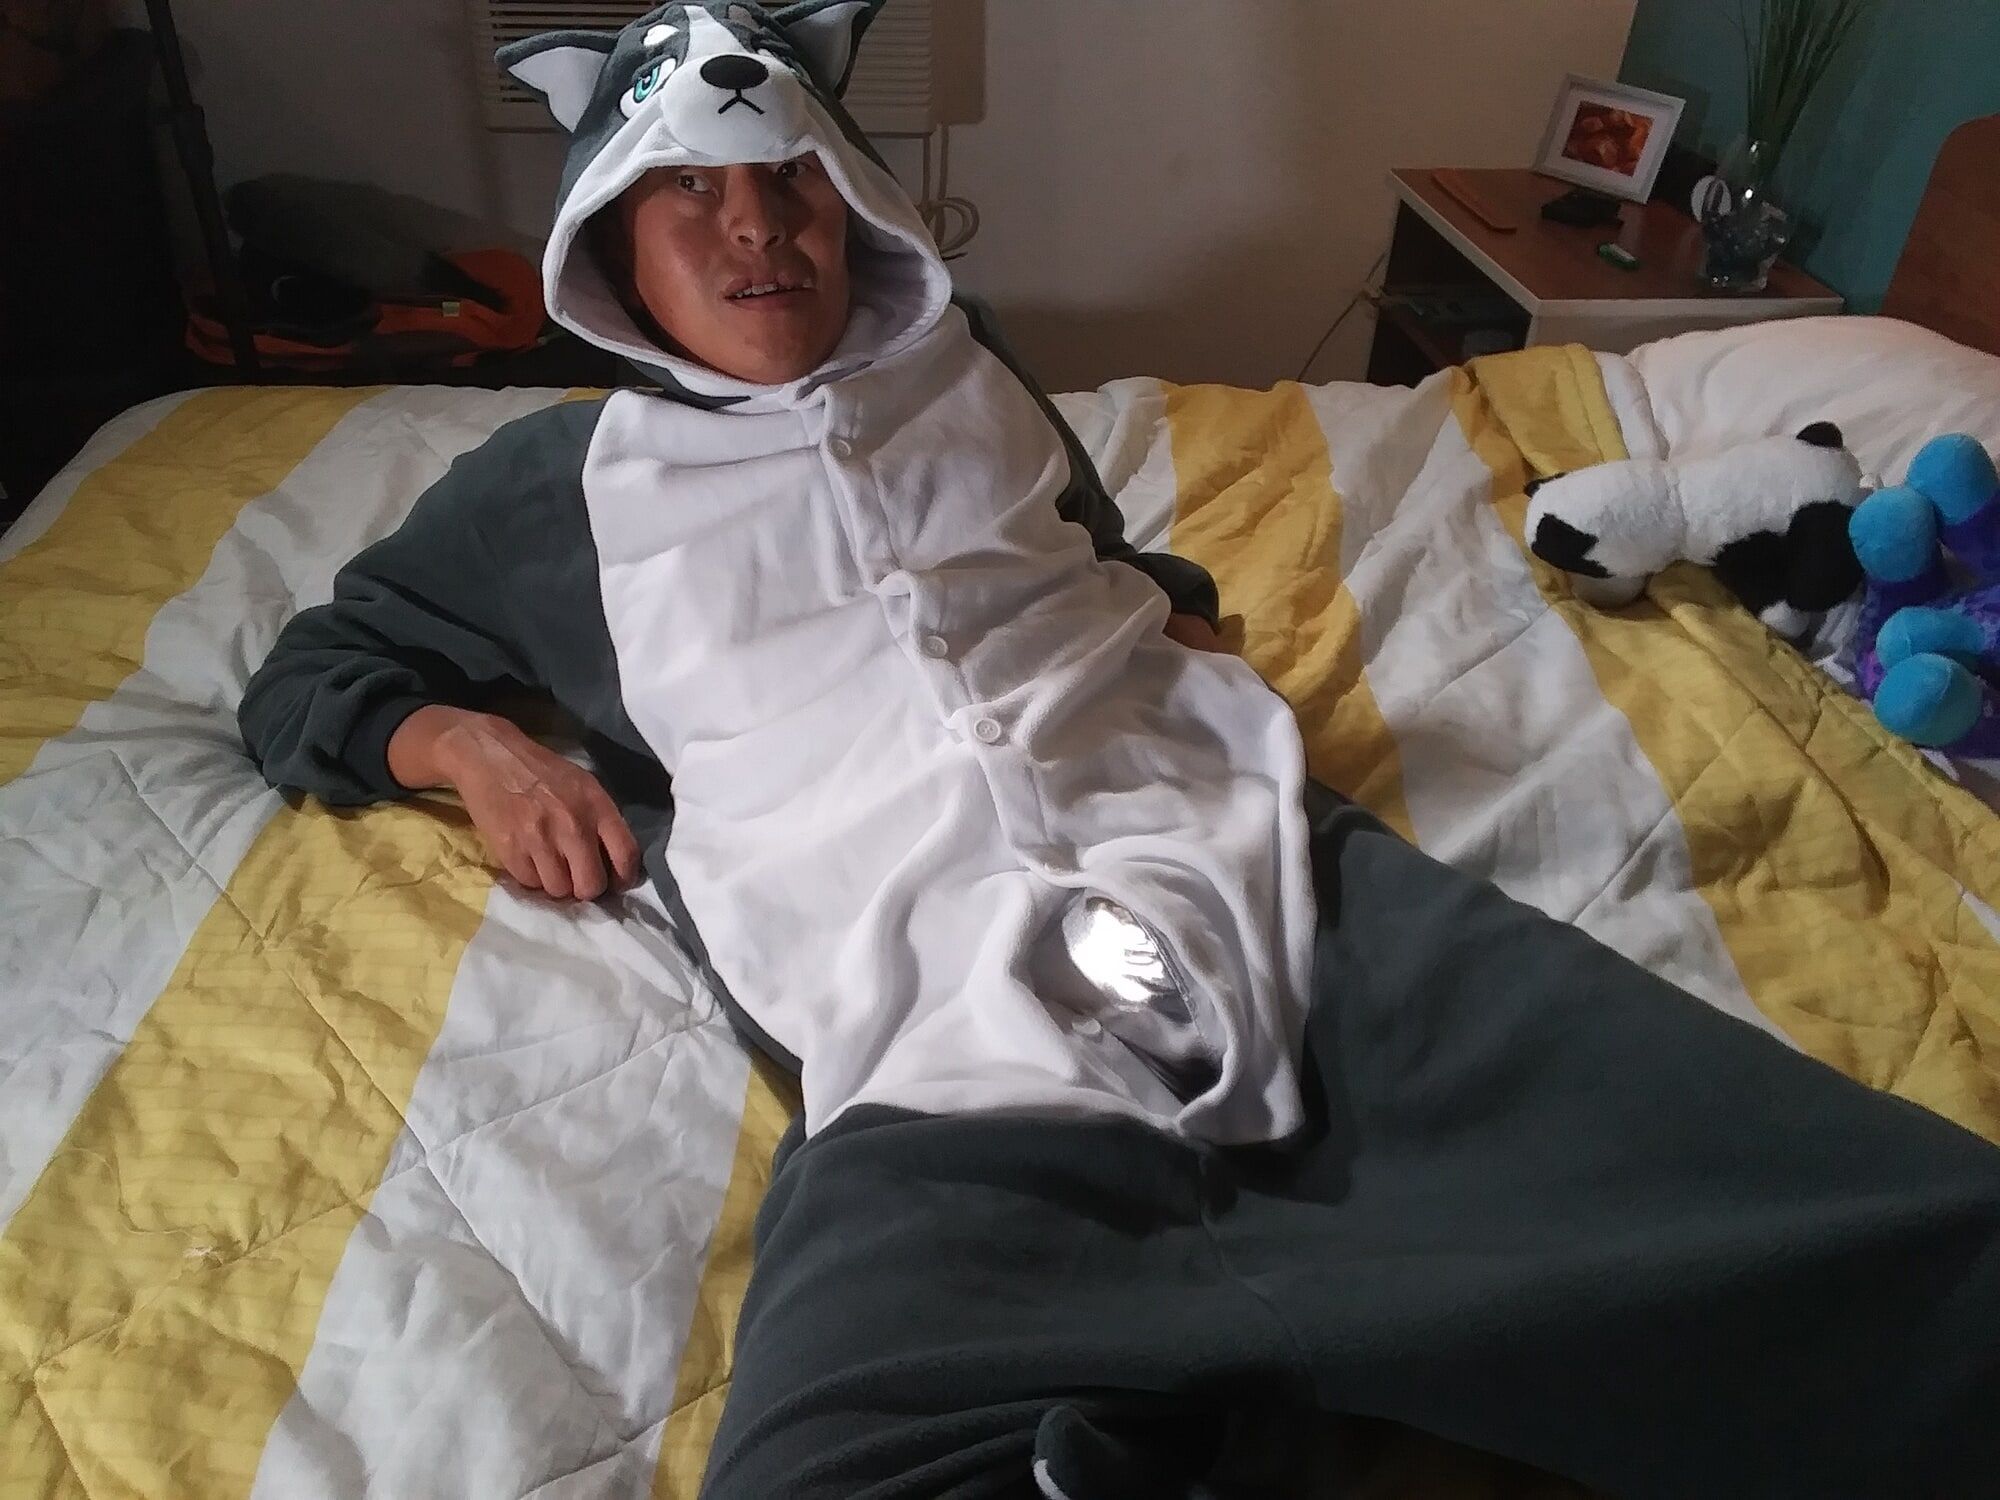 Hot asian boy wearing furry onesies and shiny undies #34